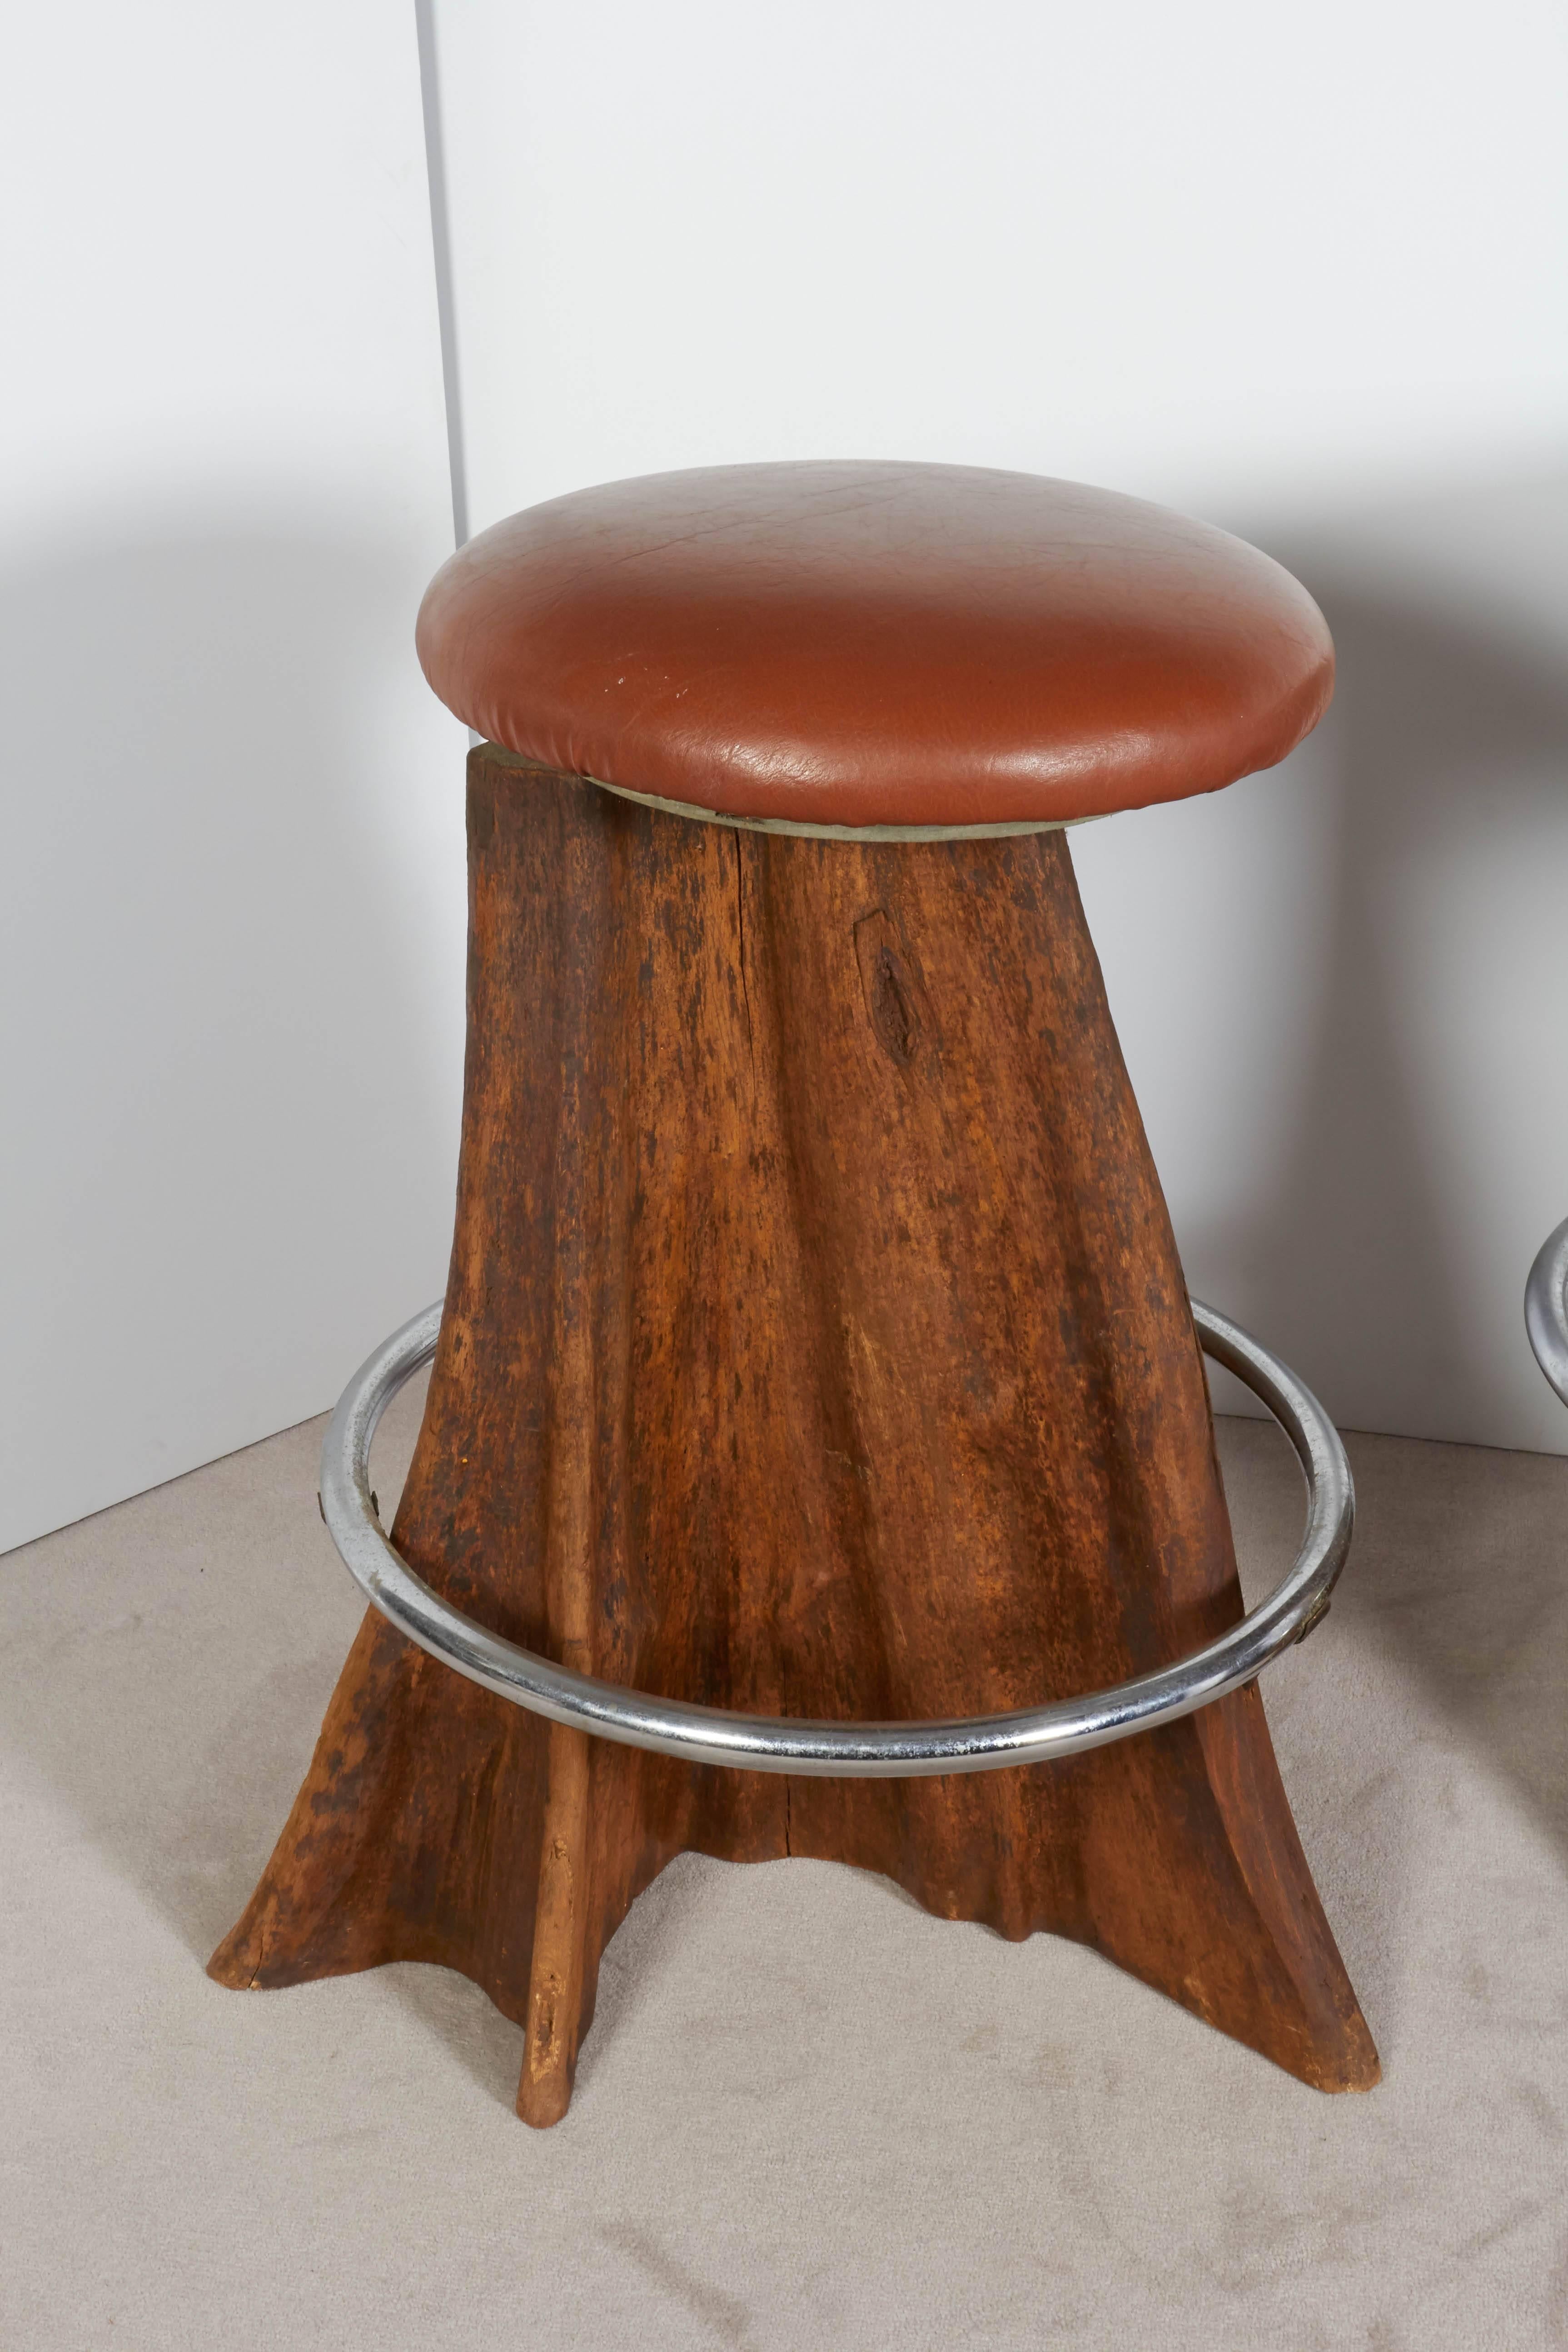 A set of three circa 1980s organic modern style swivel barstools by Brazilian designer José Zanine Caldas, each with leather seat and metal ring footrest against a cypress wood trunk as base. Excellent original condition, consistent with age and